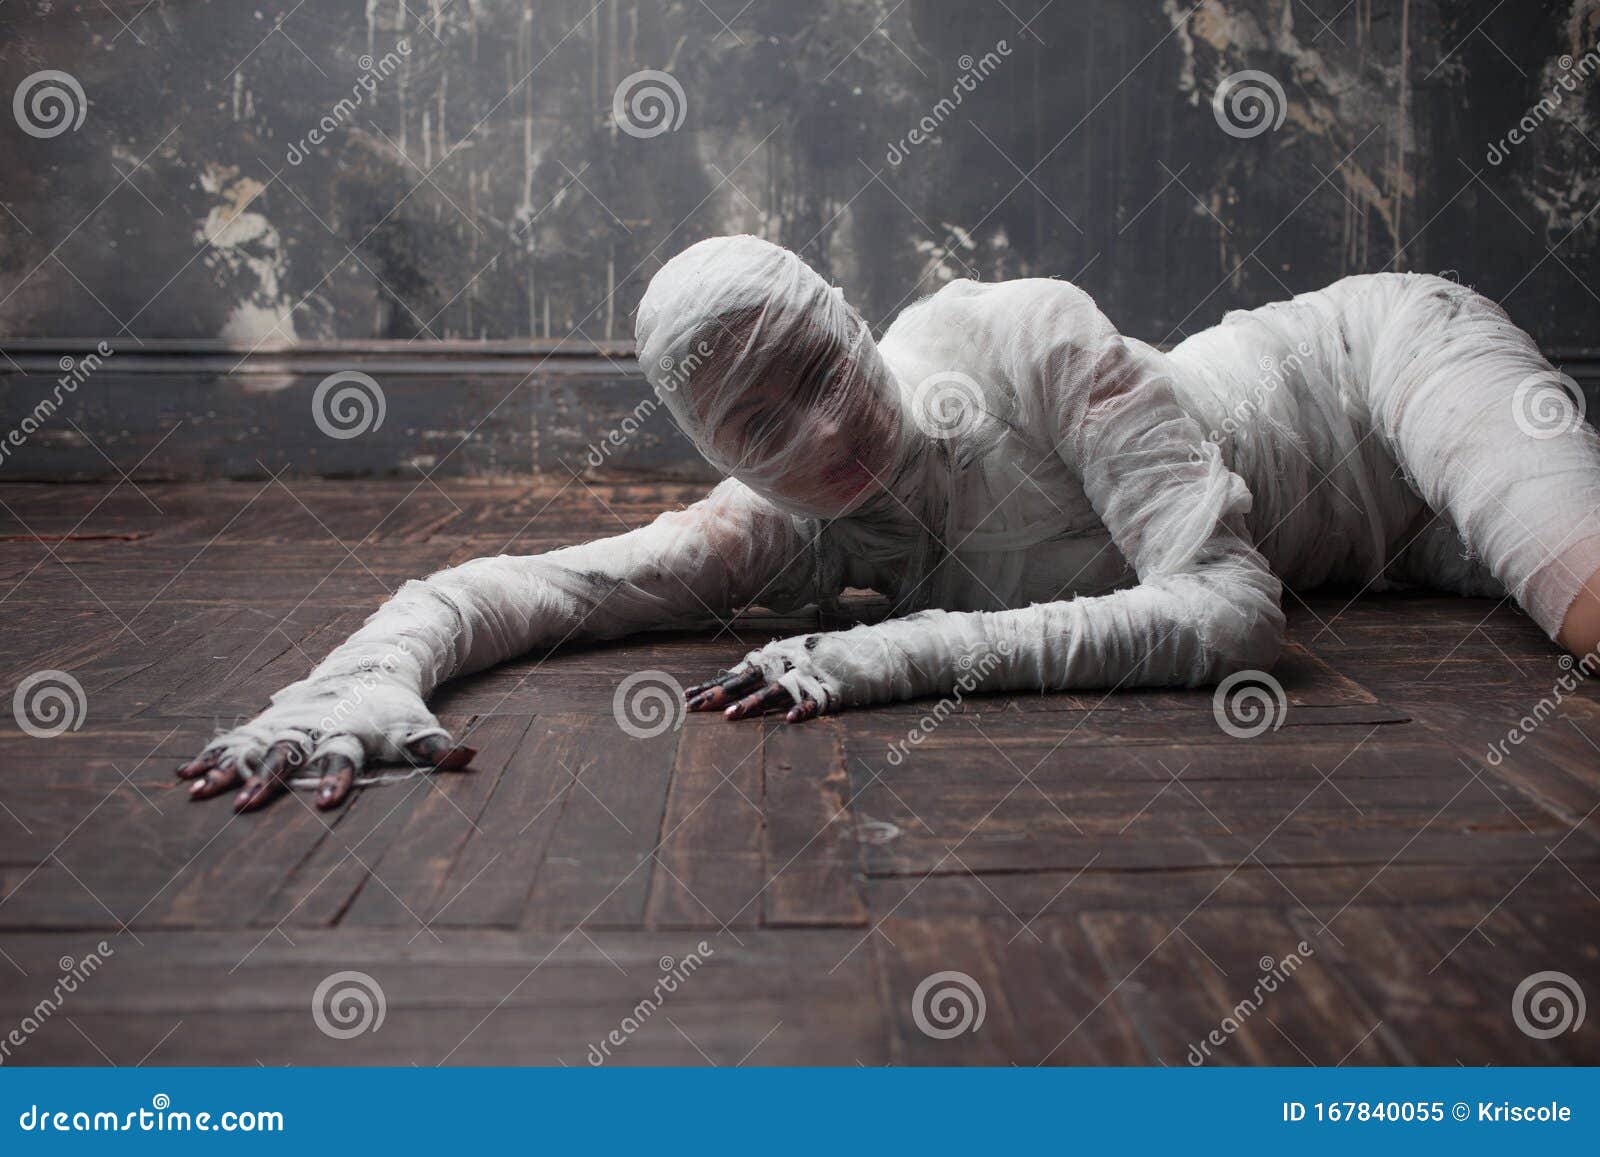 Scary Mummy Creeps On You. The Girl With The Bandage Crawling On The Floor.  Halloween Costume Stock Photo, Picture and Royalty Free Image. Image  129310486.